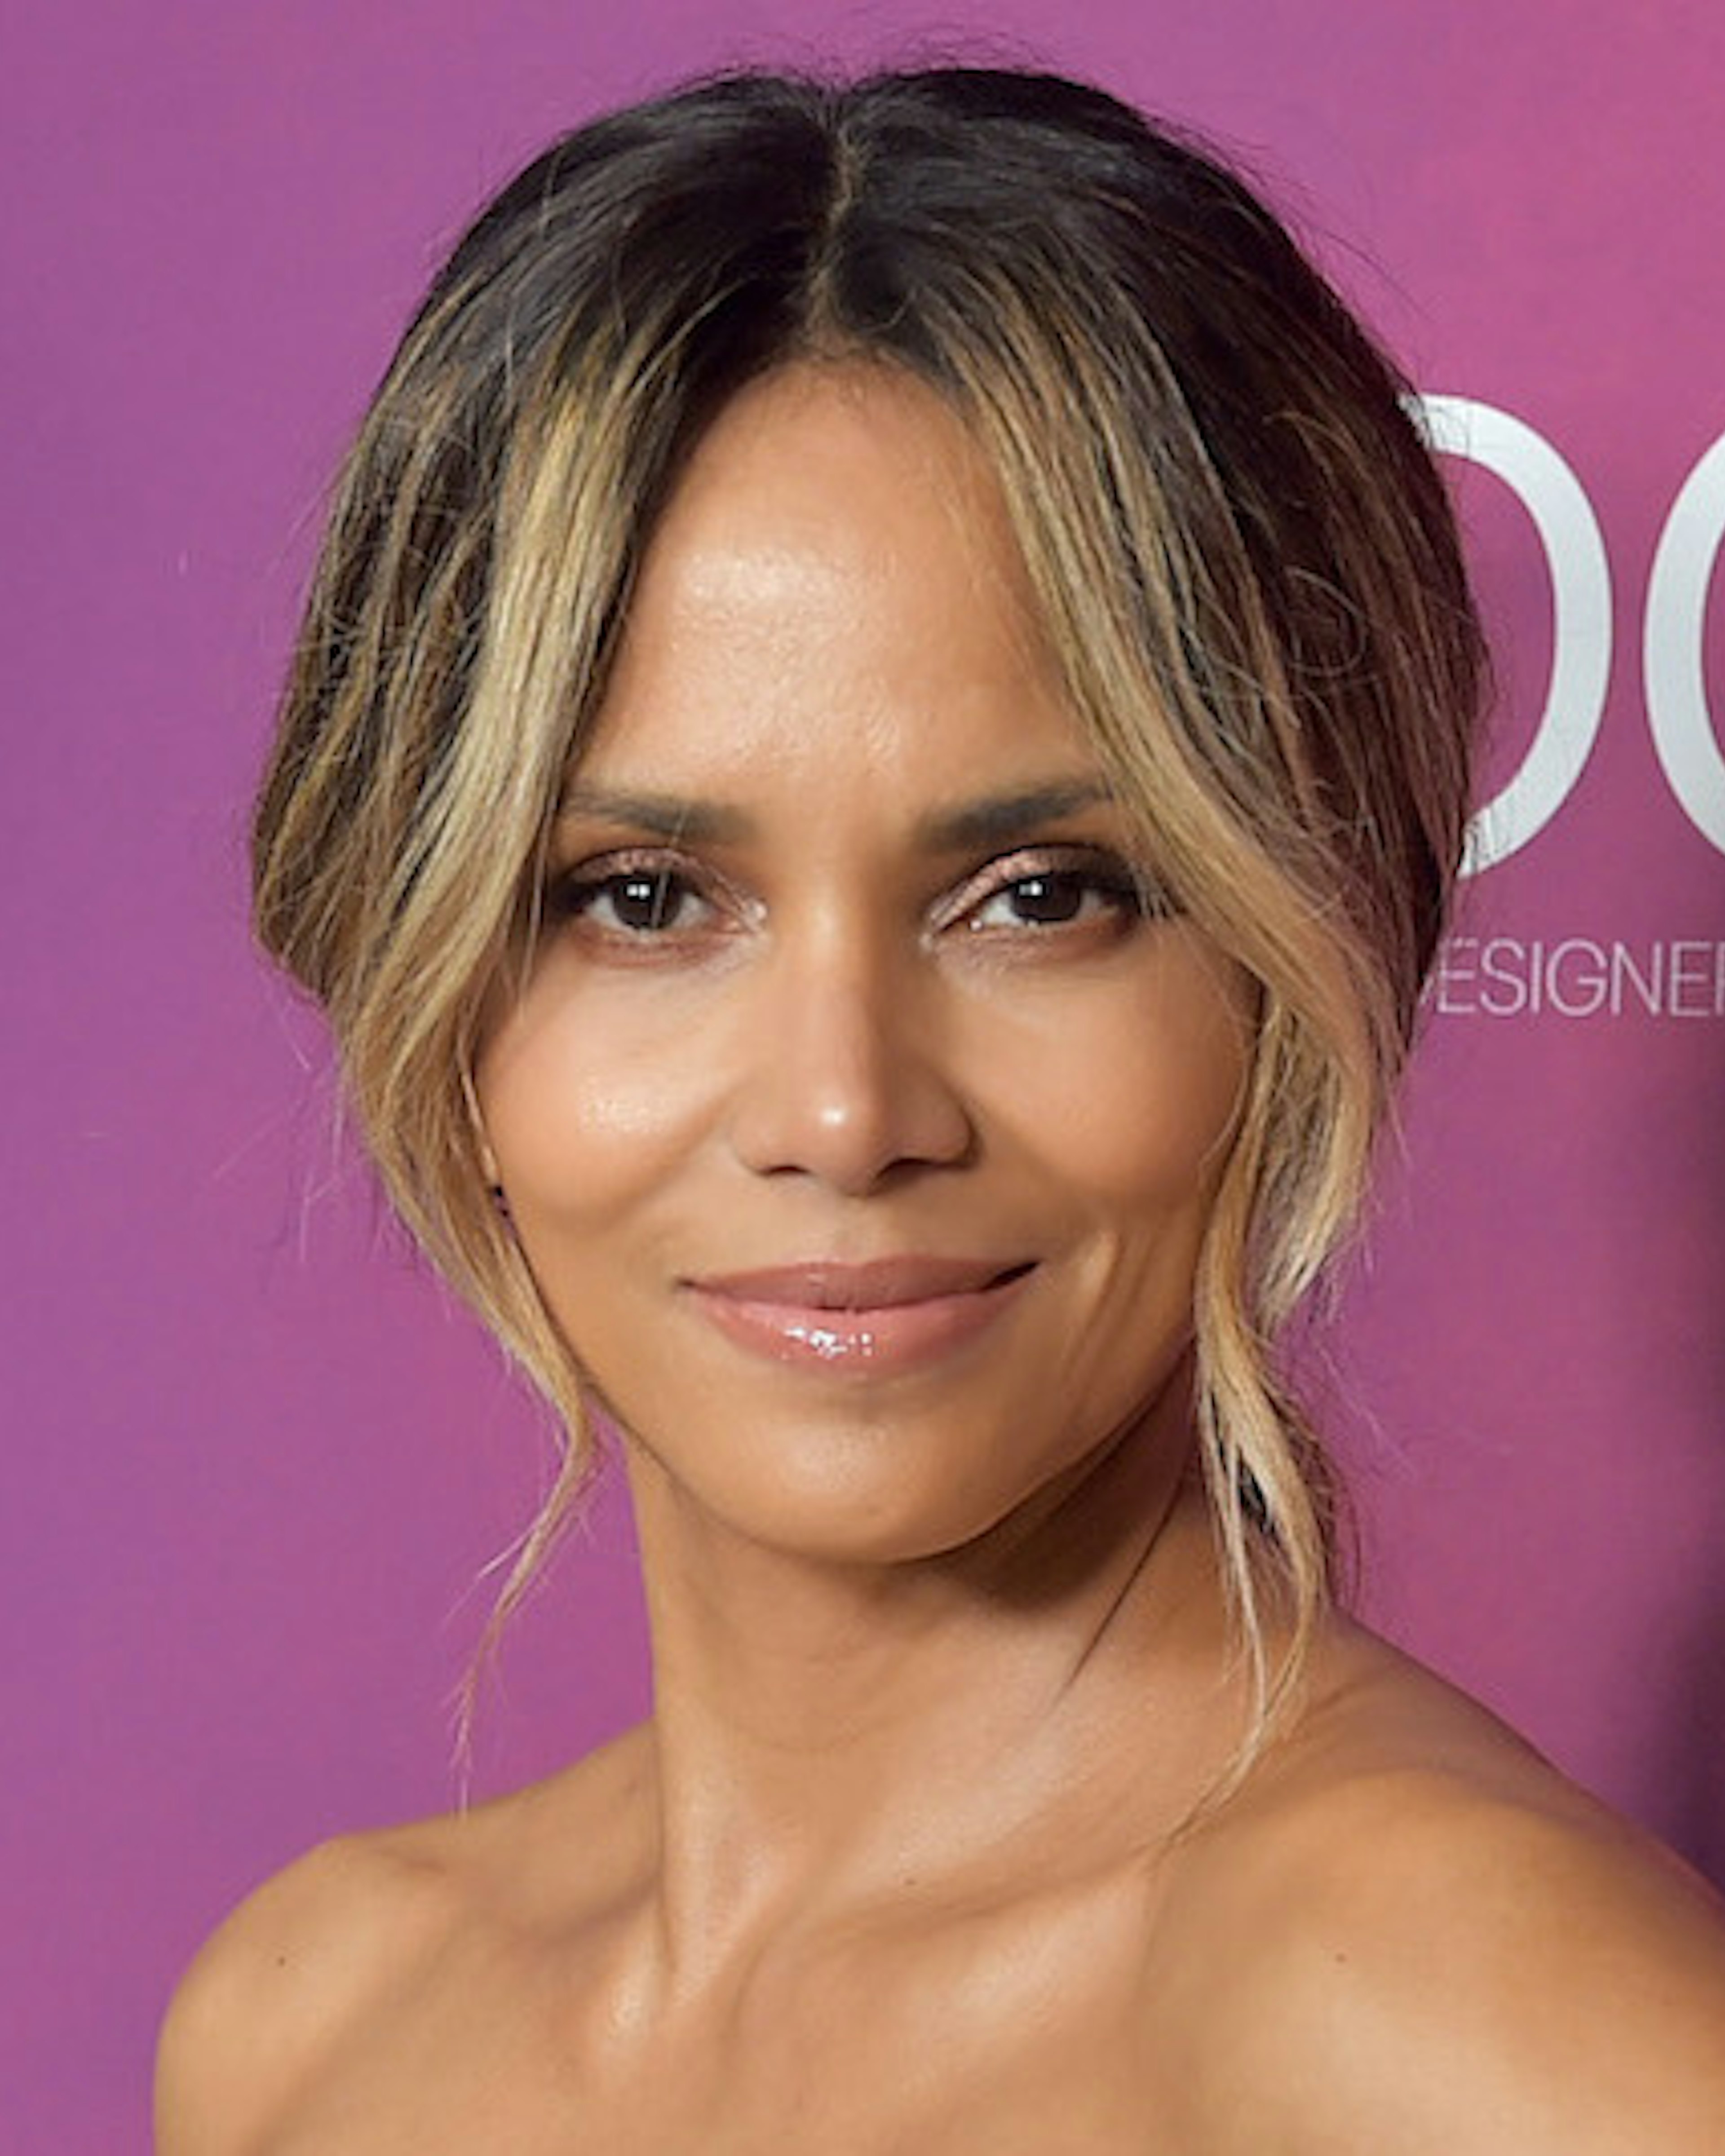 Halle Berry attends The 21st CDGA (Costume Designers Guild Awards) at The Beverly Hilton Hotel on February 19, 2019 in Beverly Hills, California. (Photo by Stefanie Keenan/Getty Images for CDGA)